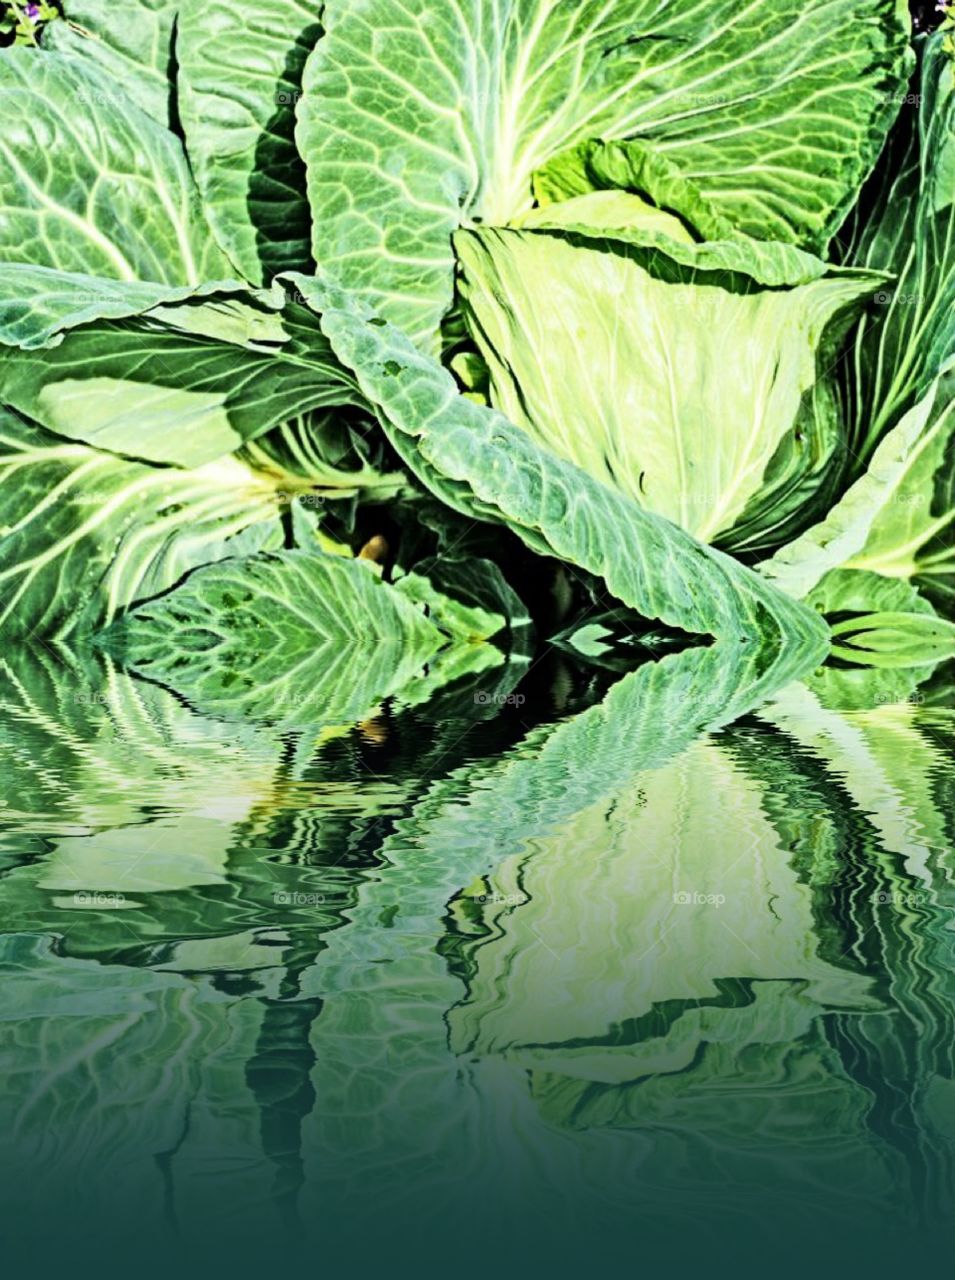 Cabbage reflection